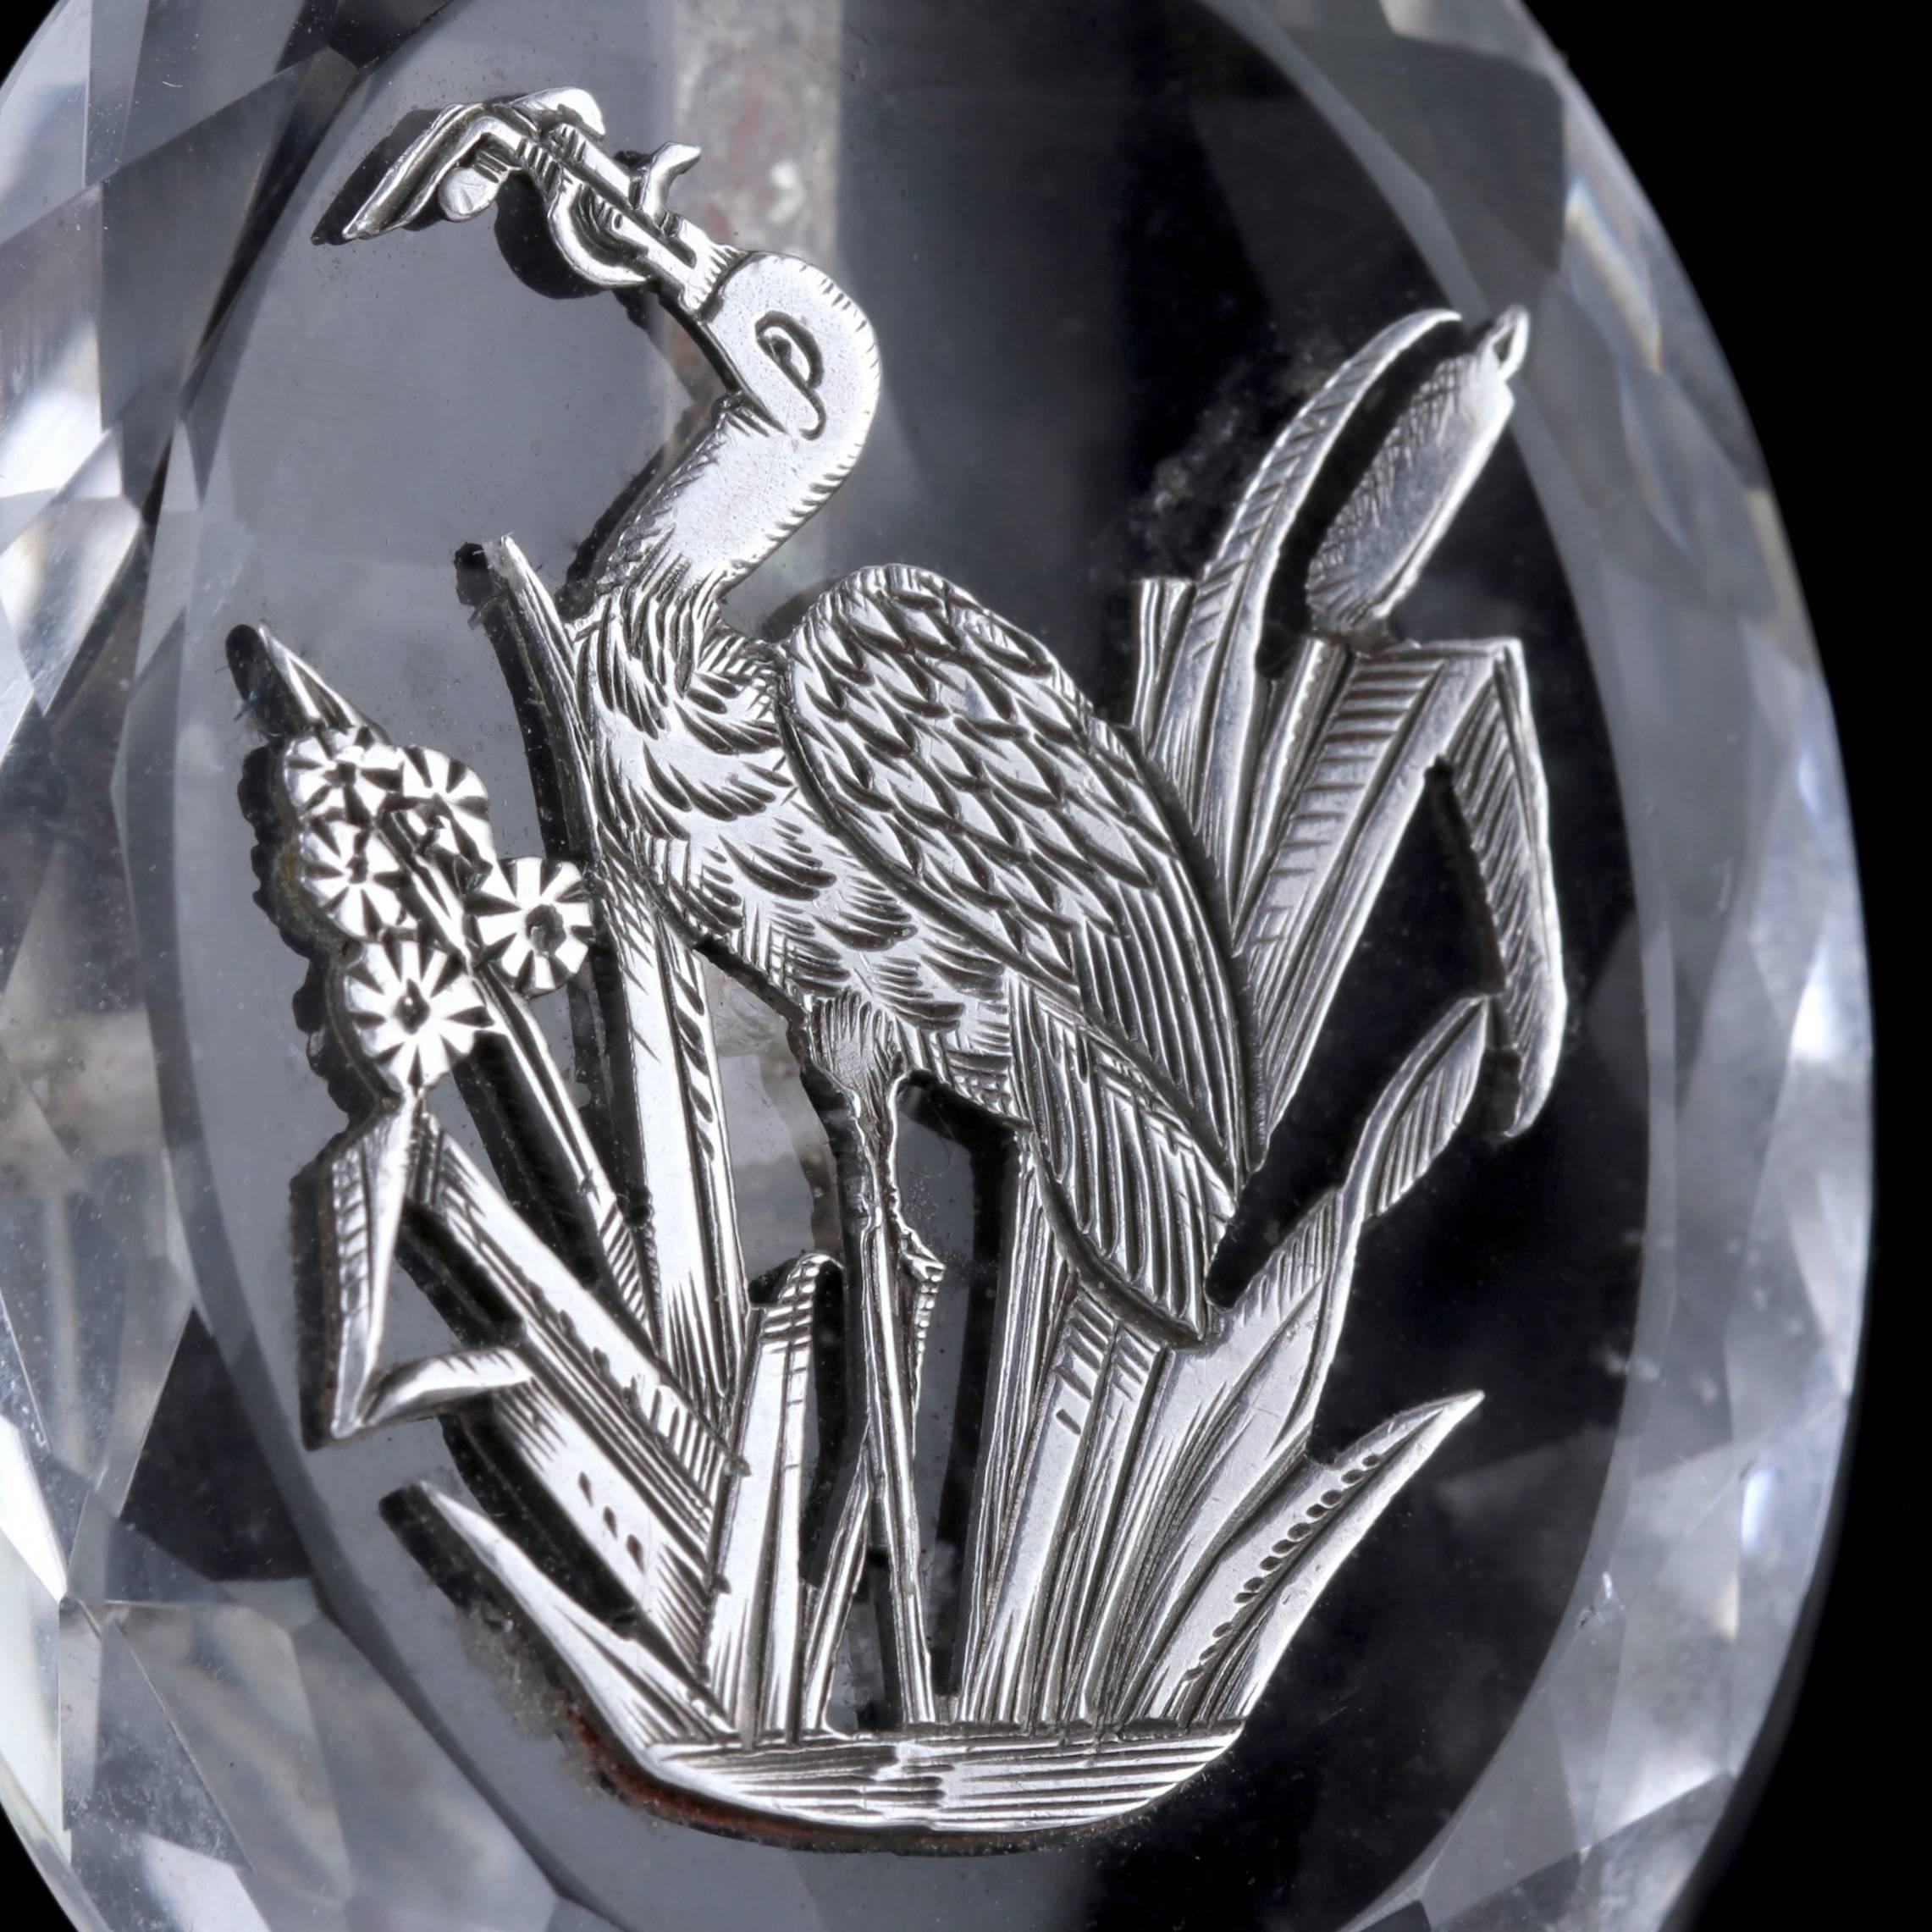 To read more please click continue reading below-

This magnificent antique Rock Crystal Pendant and Sterling Silver chain is genuine Victorian Circa 1900. 

The fabulous Clear Rock Crystal is beautifully cut displaying an engraved Silver Stork